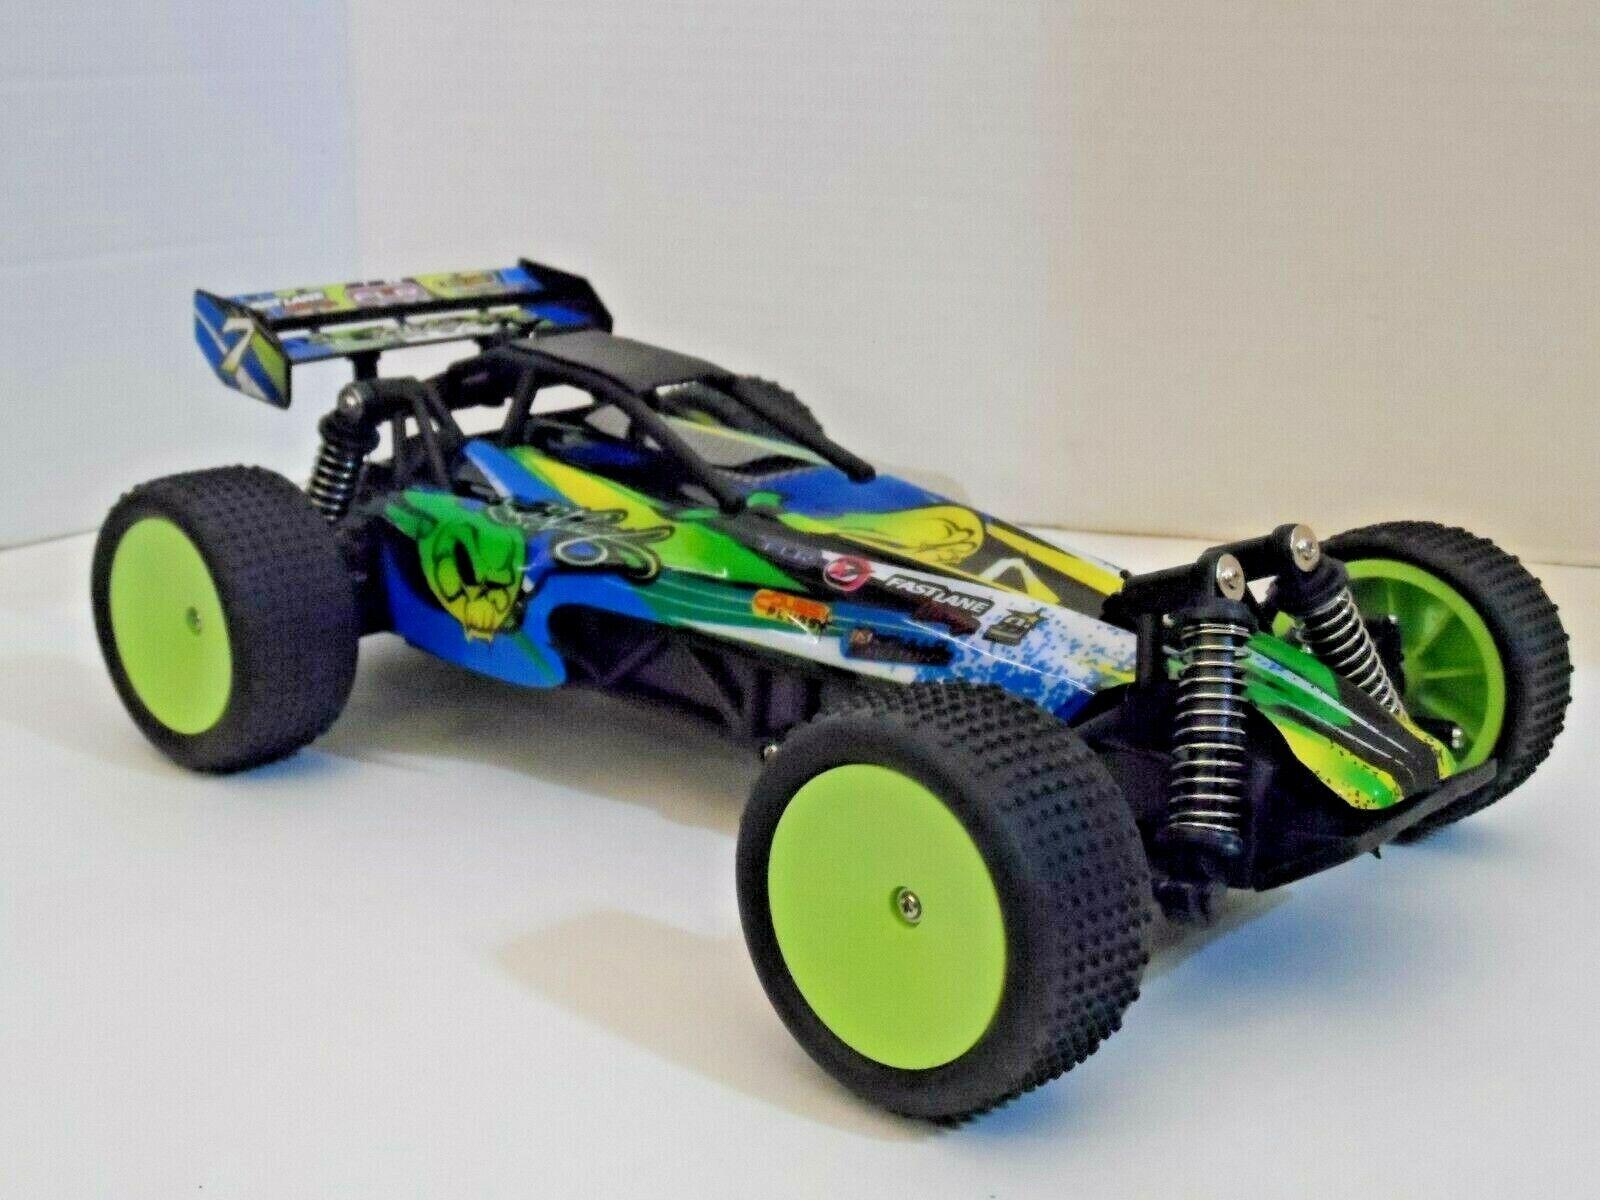 Fast Lane Rc Car: Key Points to Know About Fast Lane RC Cars